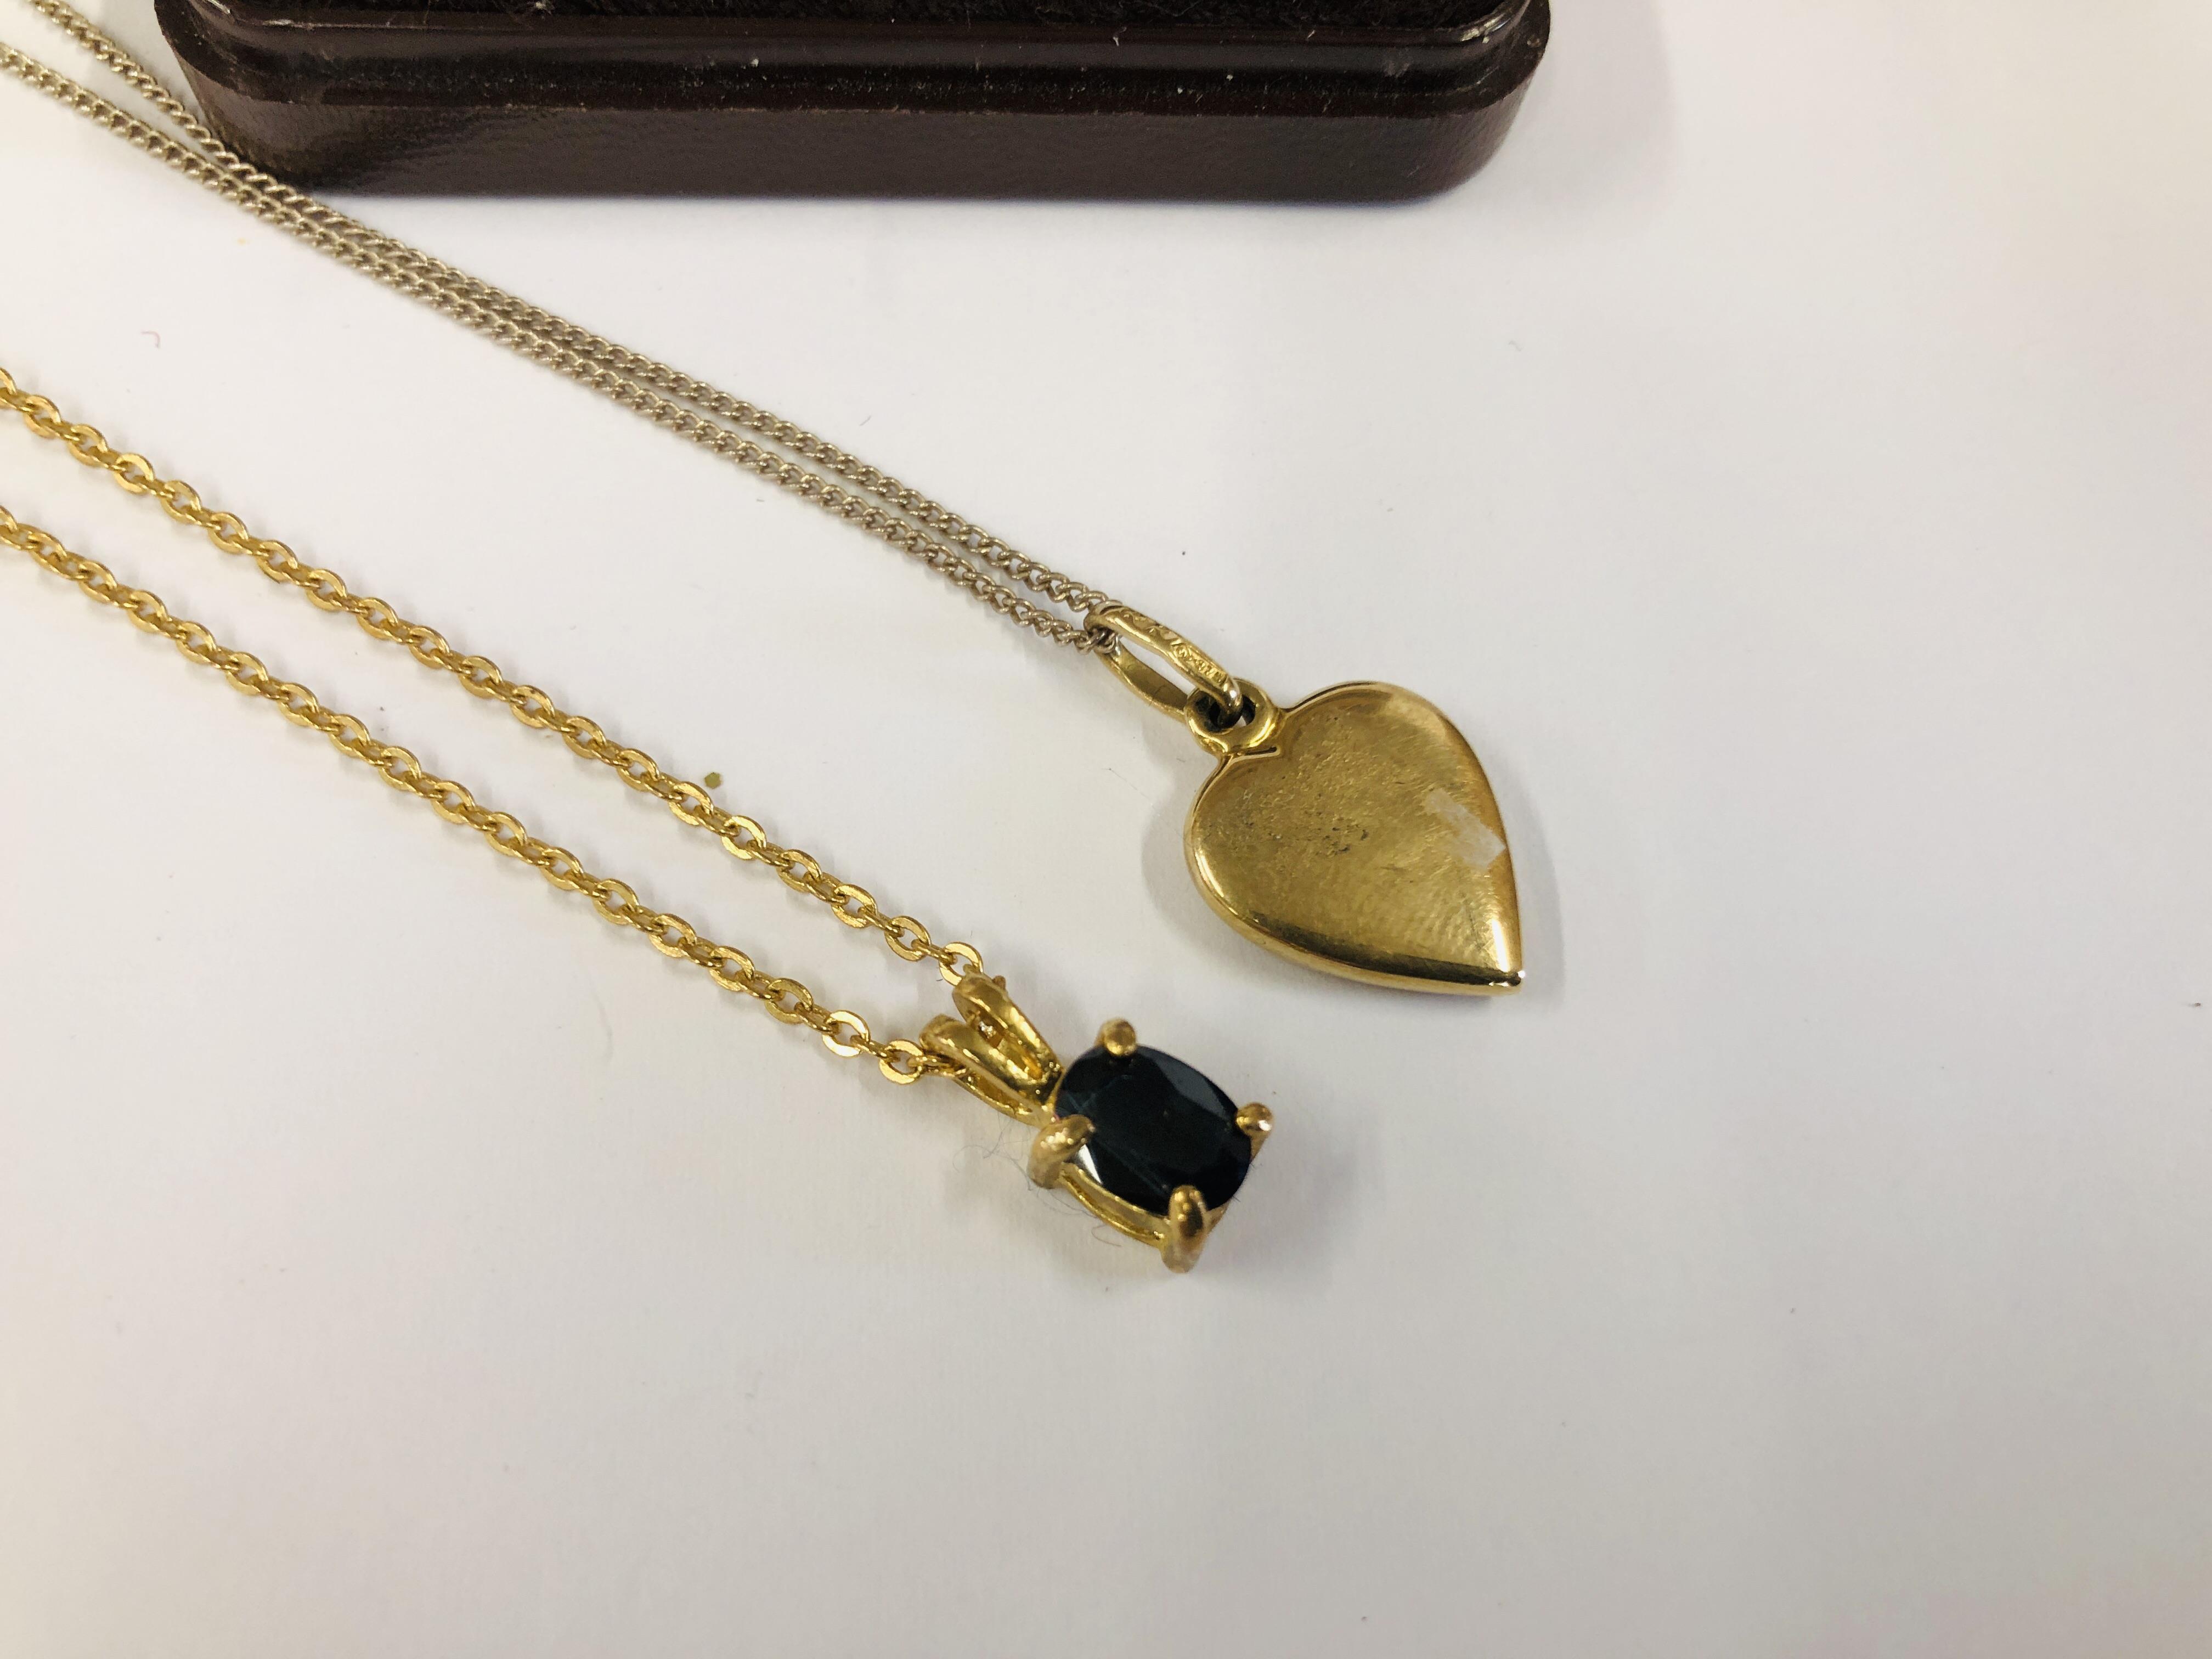 YELLOW METAL SINGLE STONE PENDANT AND NECKLACE, 9CT GOLD HEART PENDANT ON A SILVER CHAIN, - Image 2 of 10